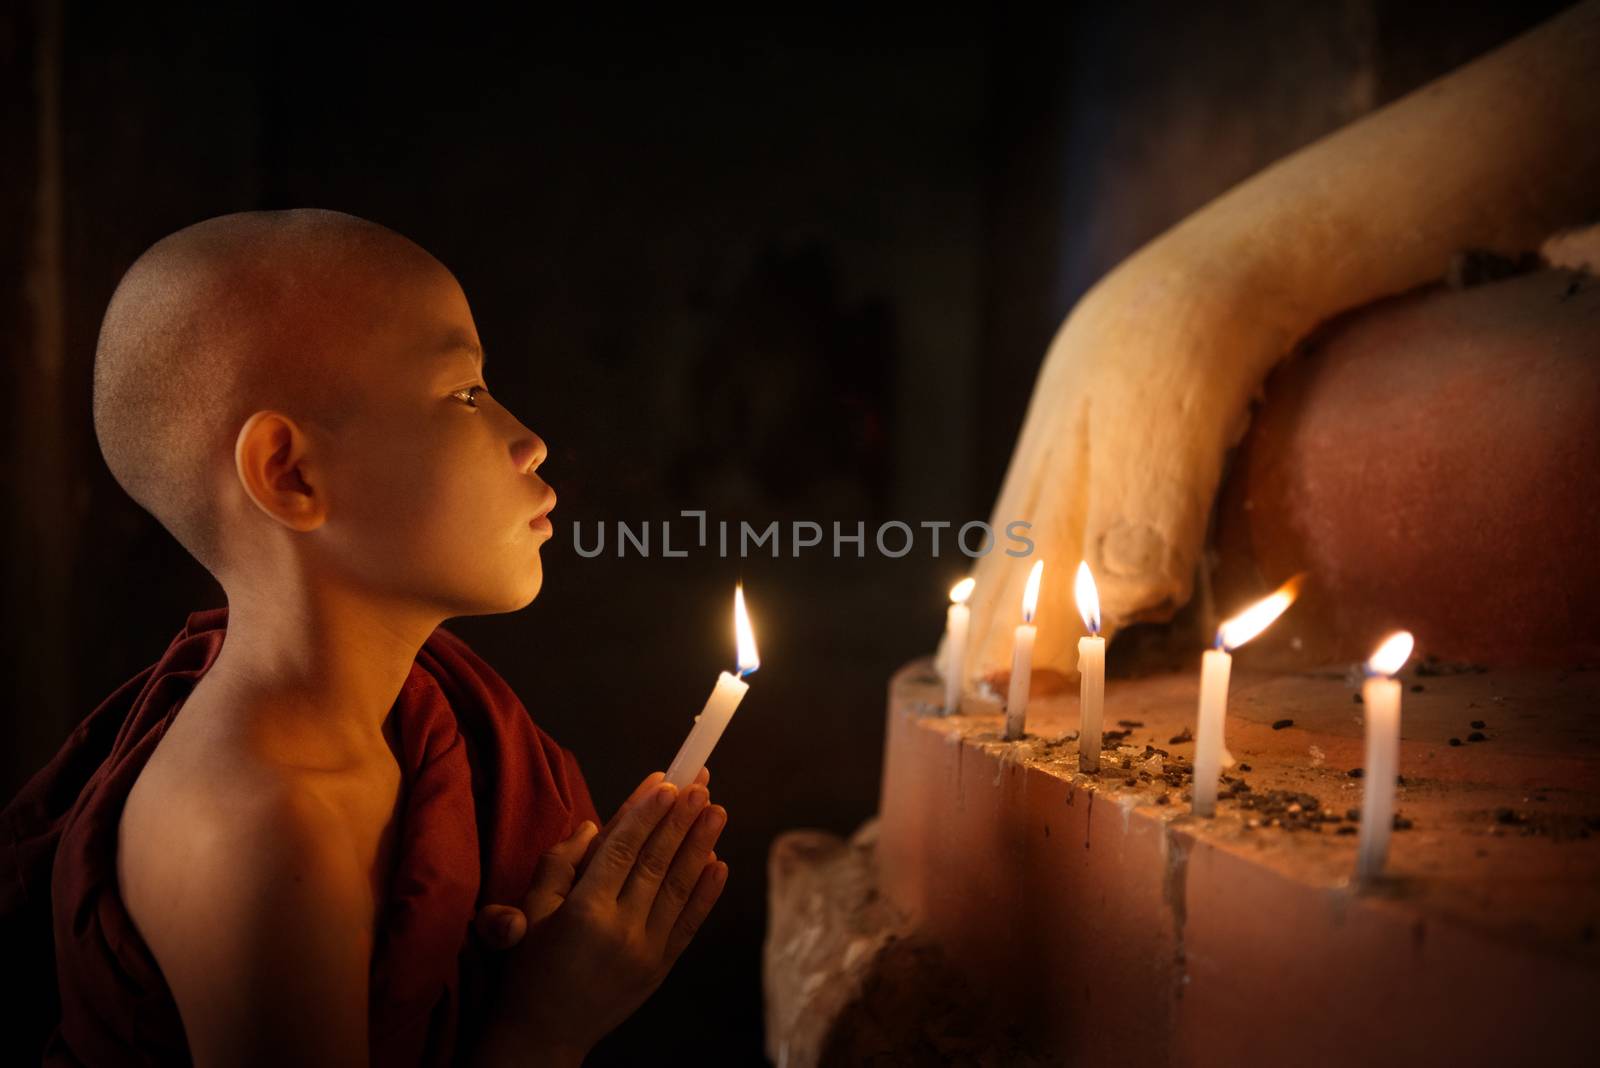 Portrait of young novice monk praying with candlelight inside a Buddhist temple, low light setting, Bagan, Myanmar.